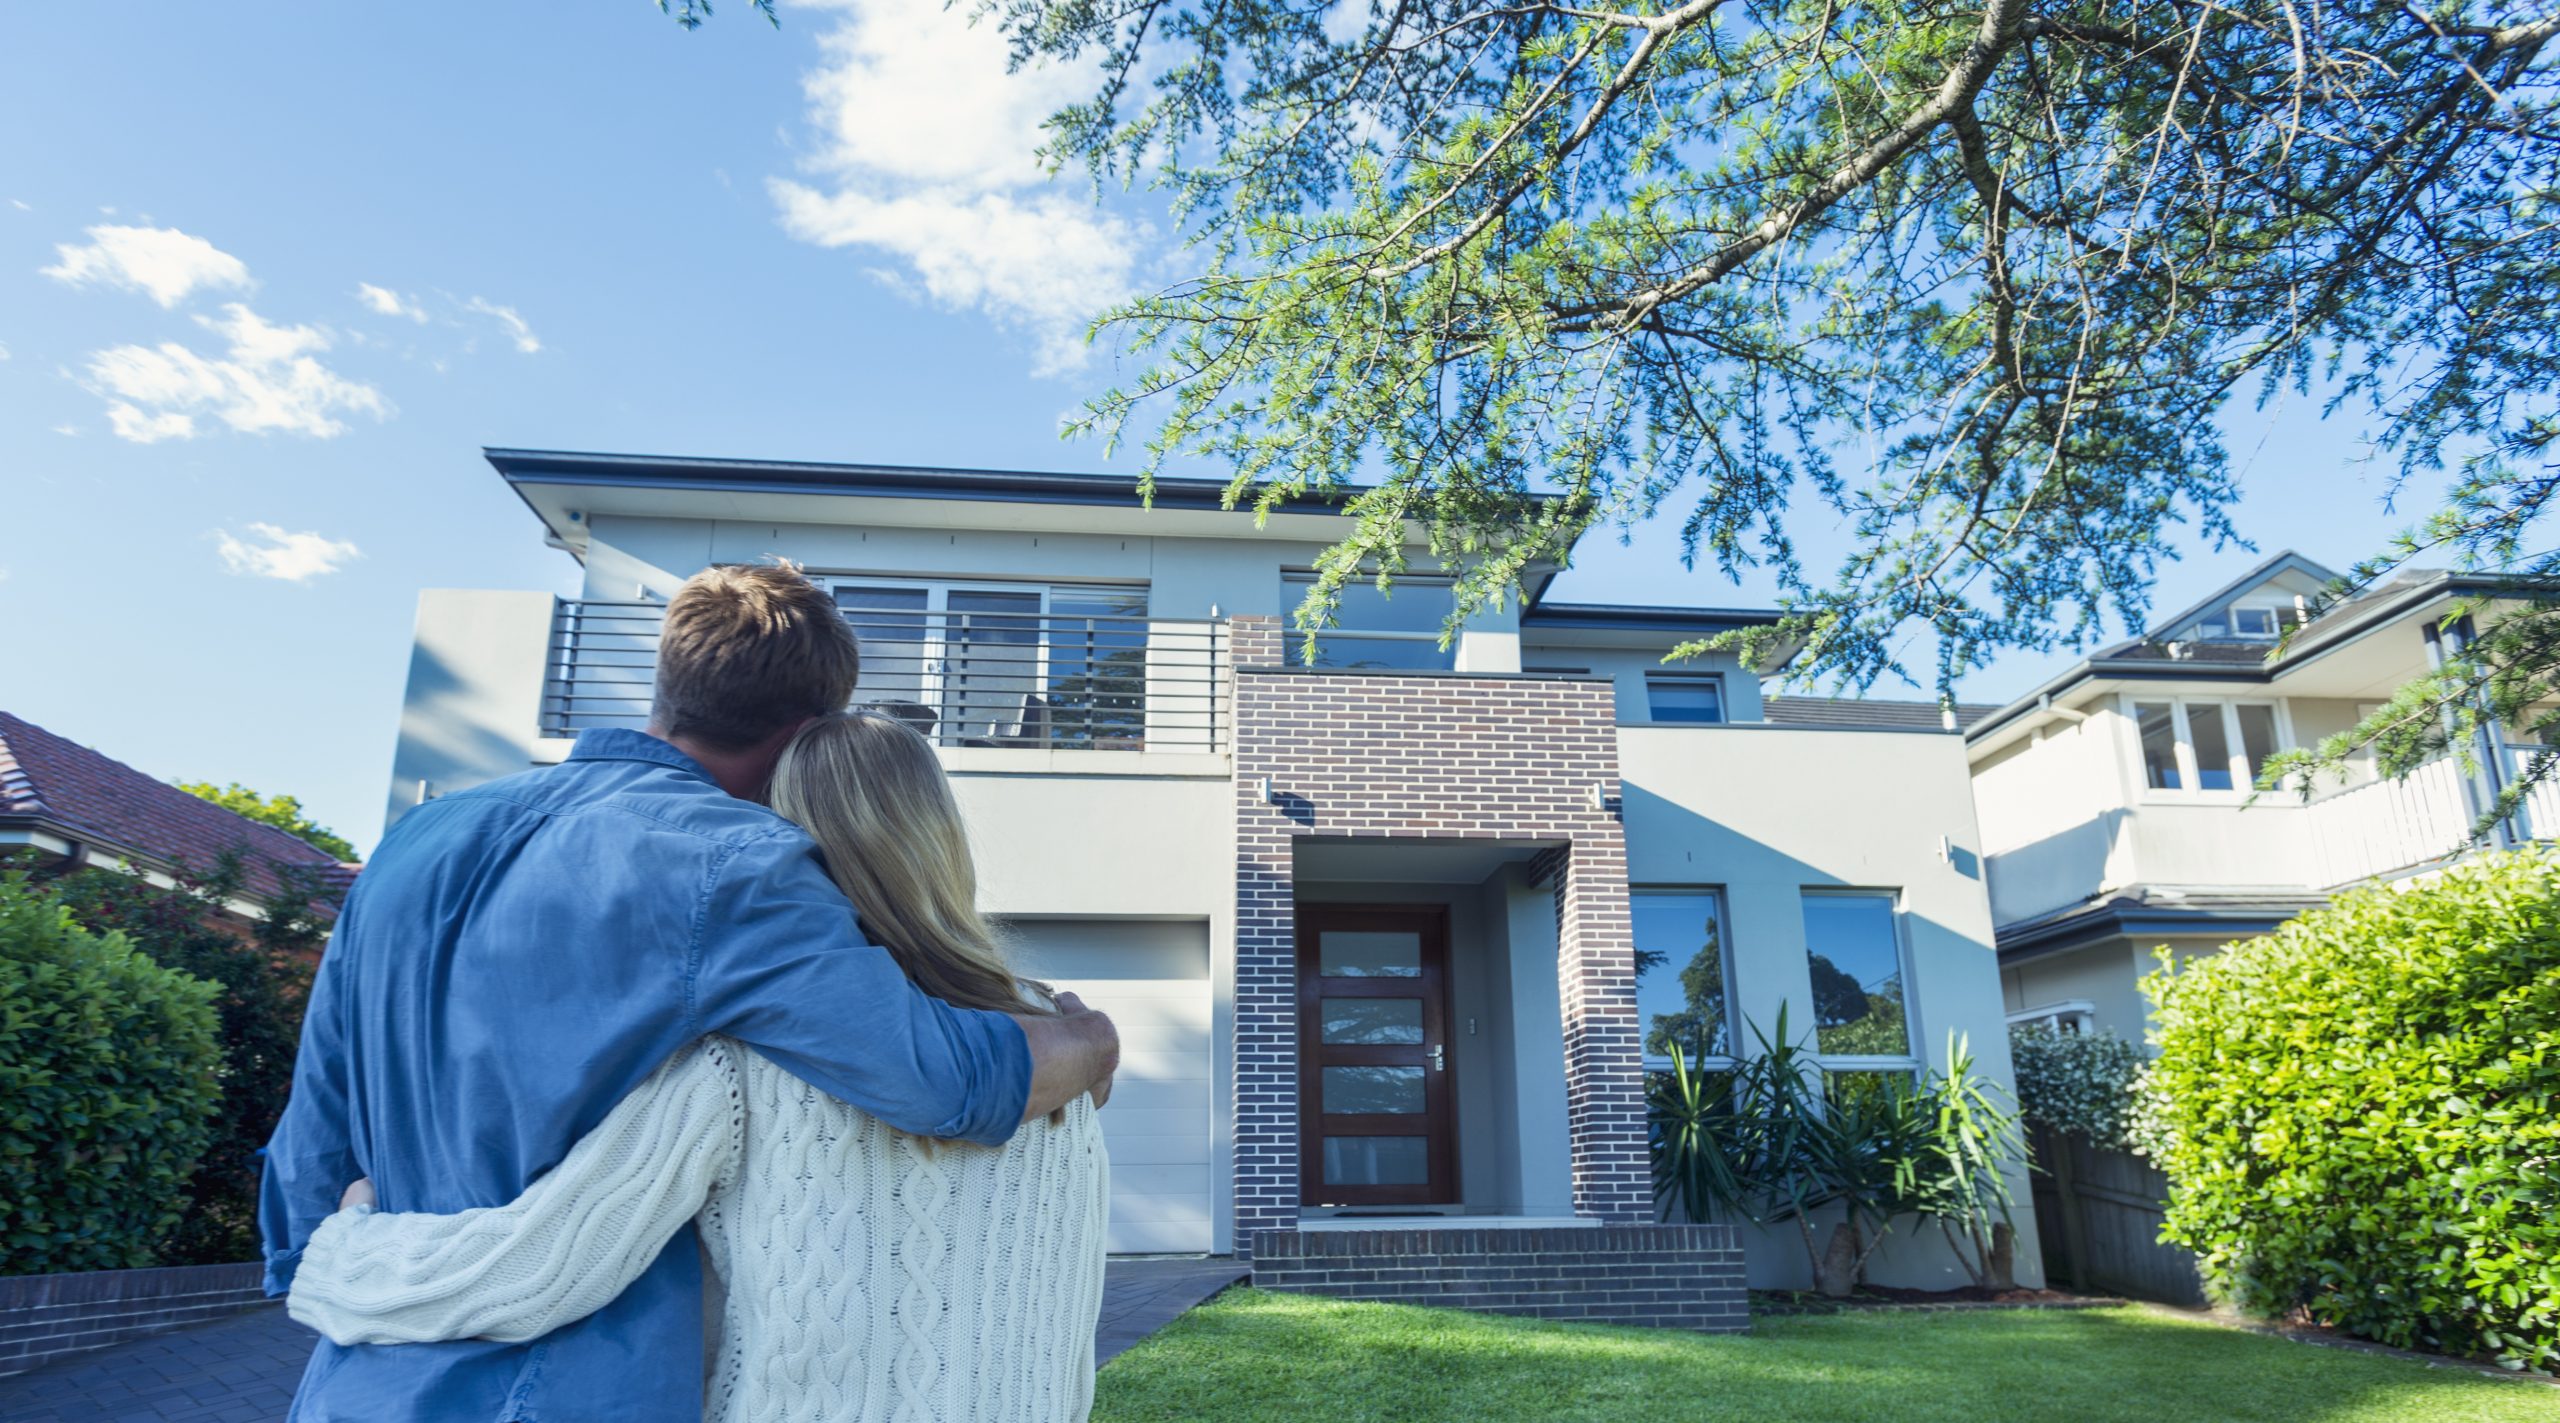 5 Signs That Mean It’s Time To Buy Your First Home